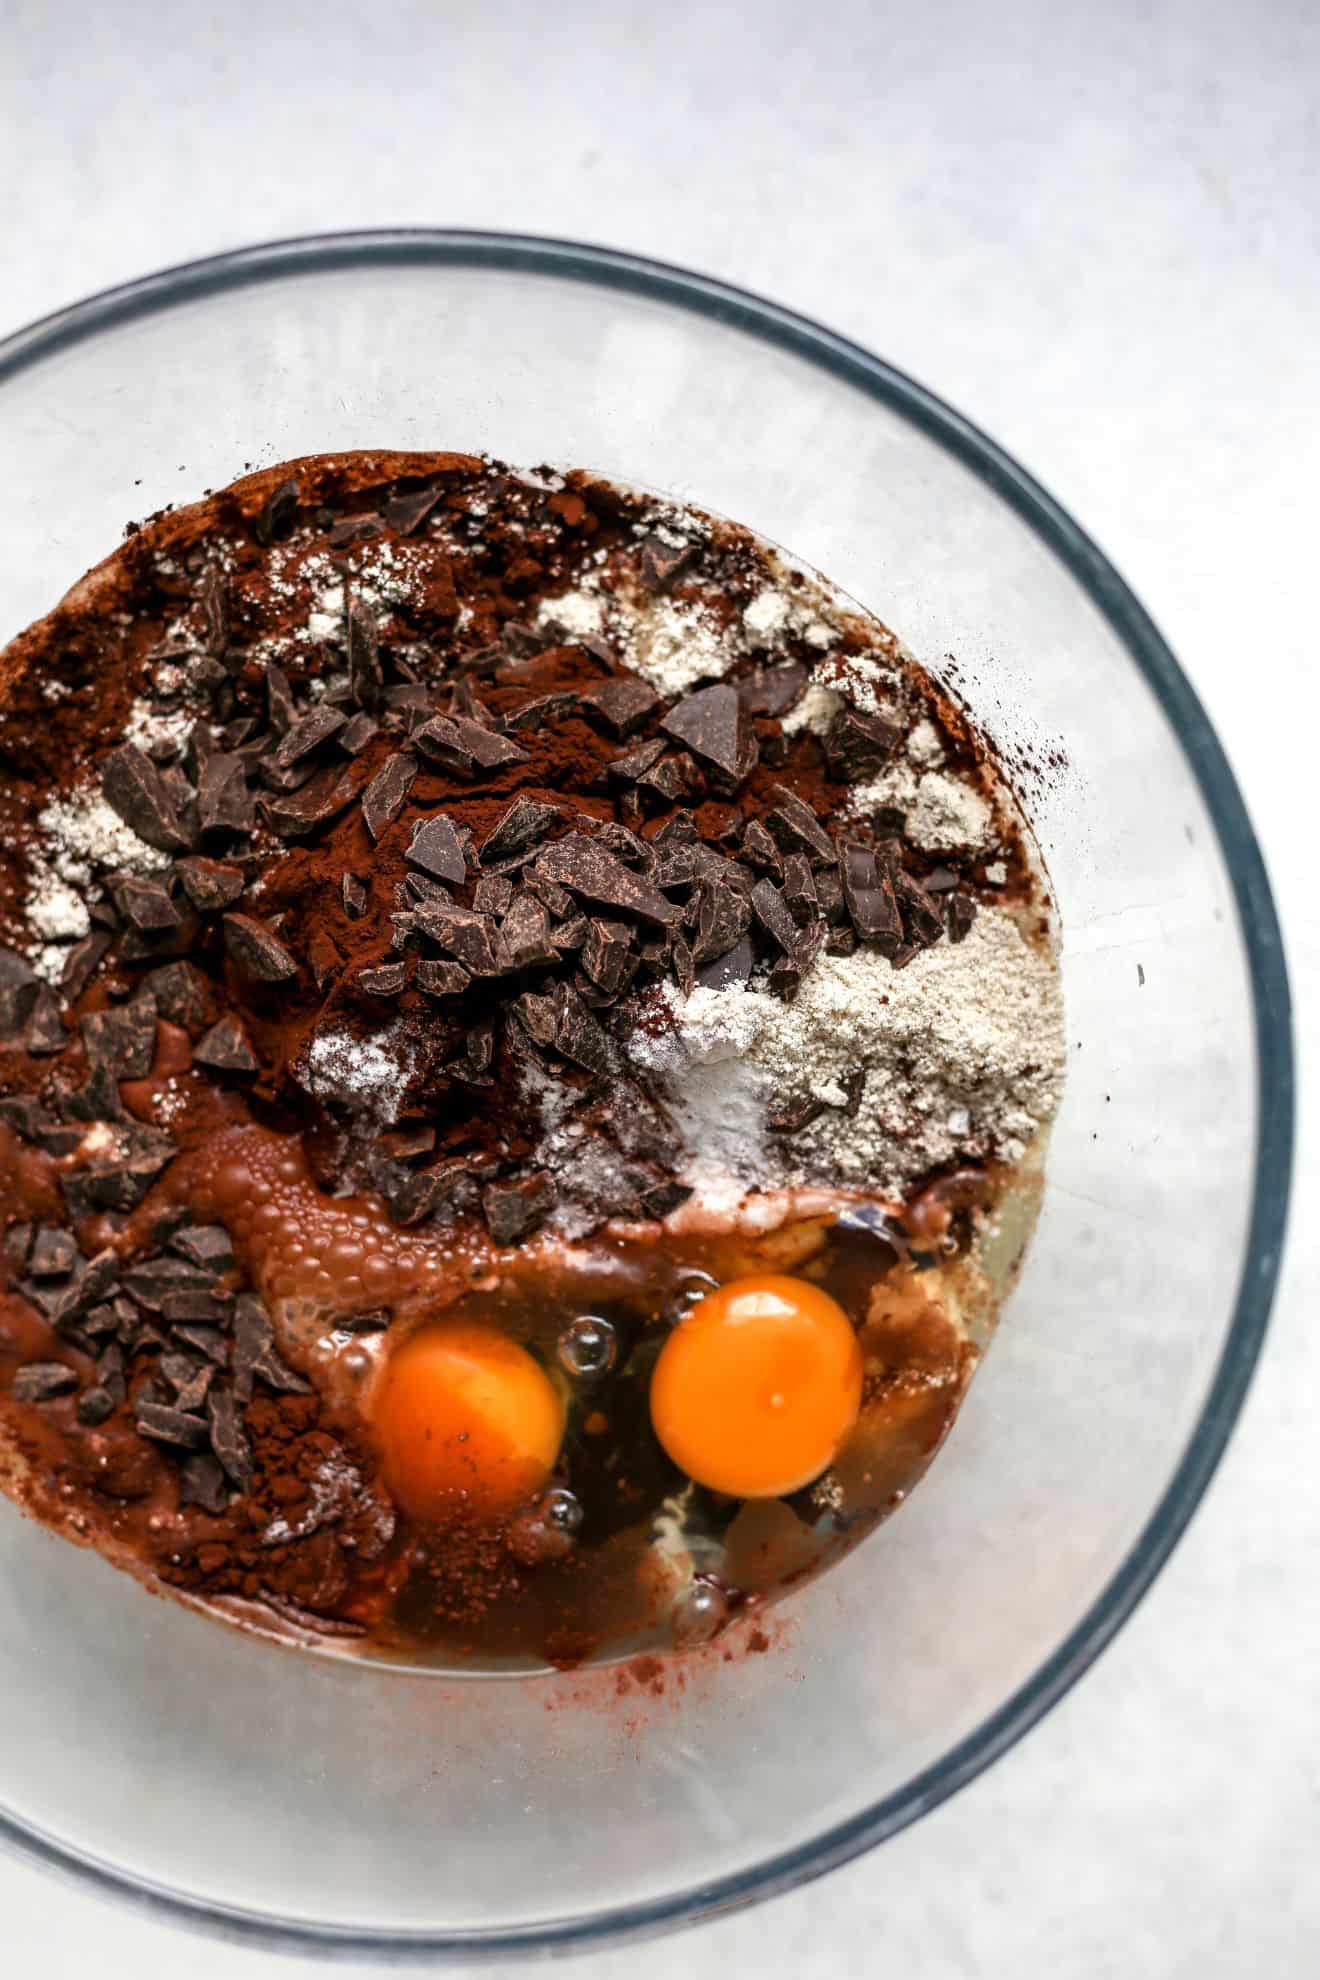 This is an overhead image of a glass bowl with eggs, chocolate chips, cocoa, oat flour, and other ingredients. The glass bowl sits on a white surface.